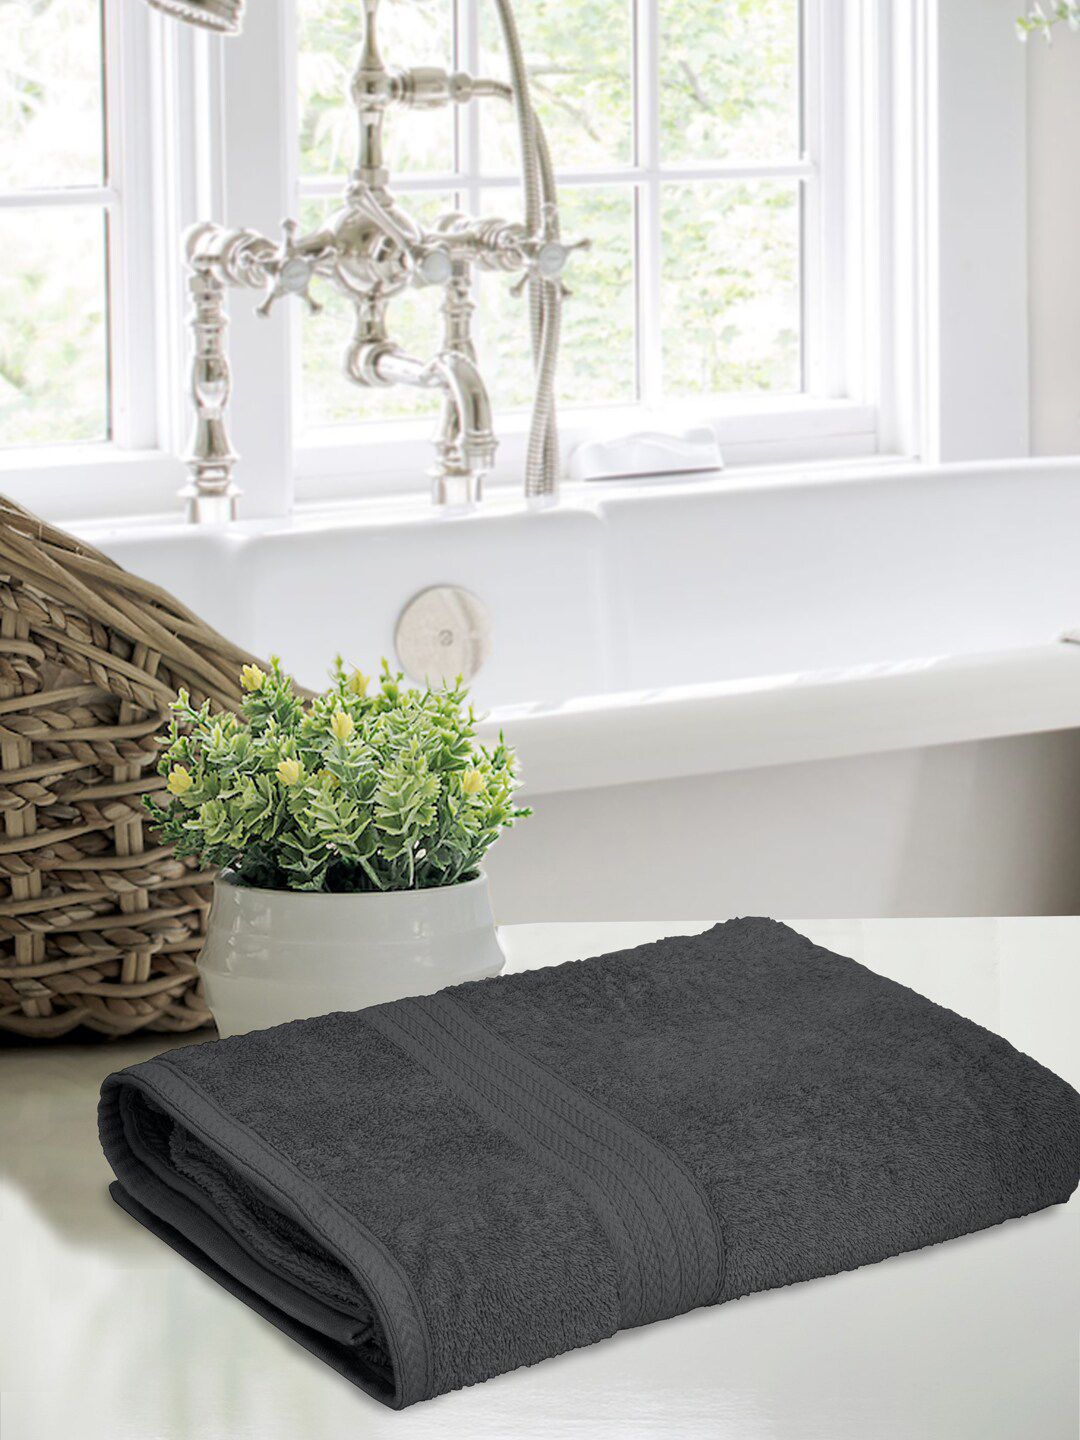 BOMBAY DYEING Unisex Charcoal Grey Solid Cotton Tulip 450 GSM Bath Towel Price in India